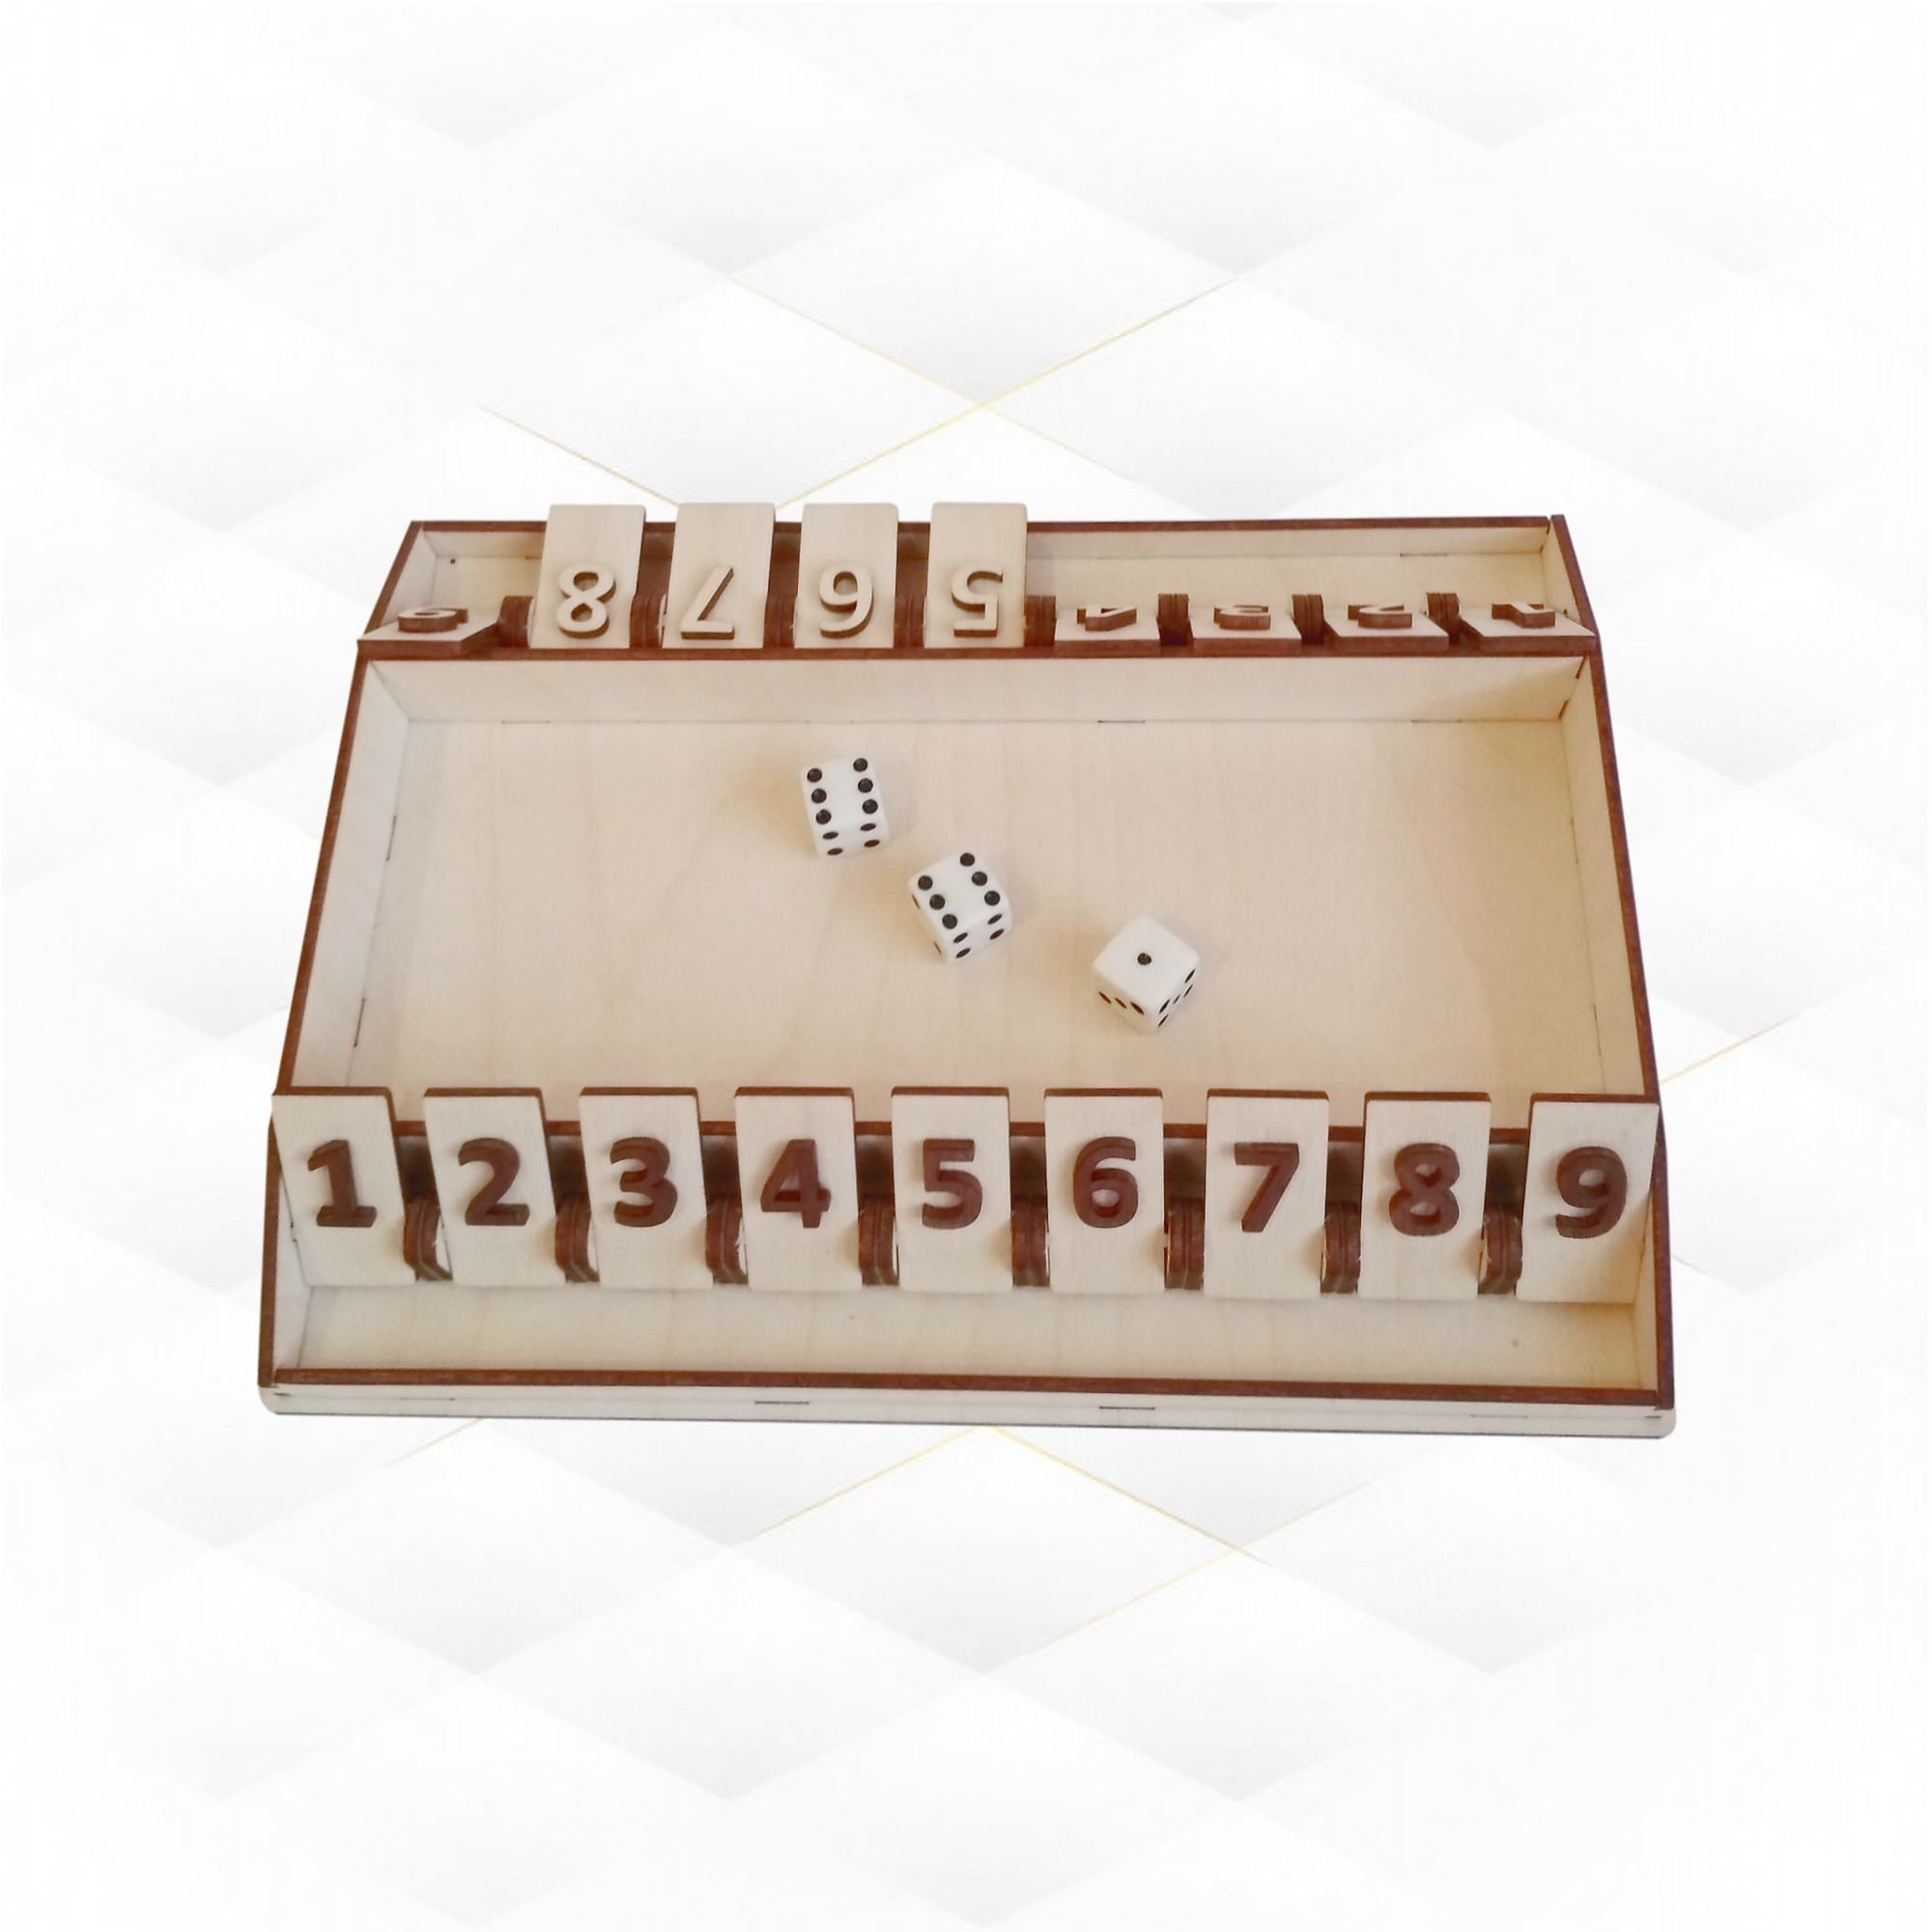 Board Game Pieces and Dices, 3D rendering Stock Photo by ©alexlmx